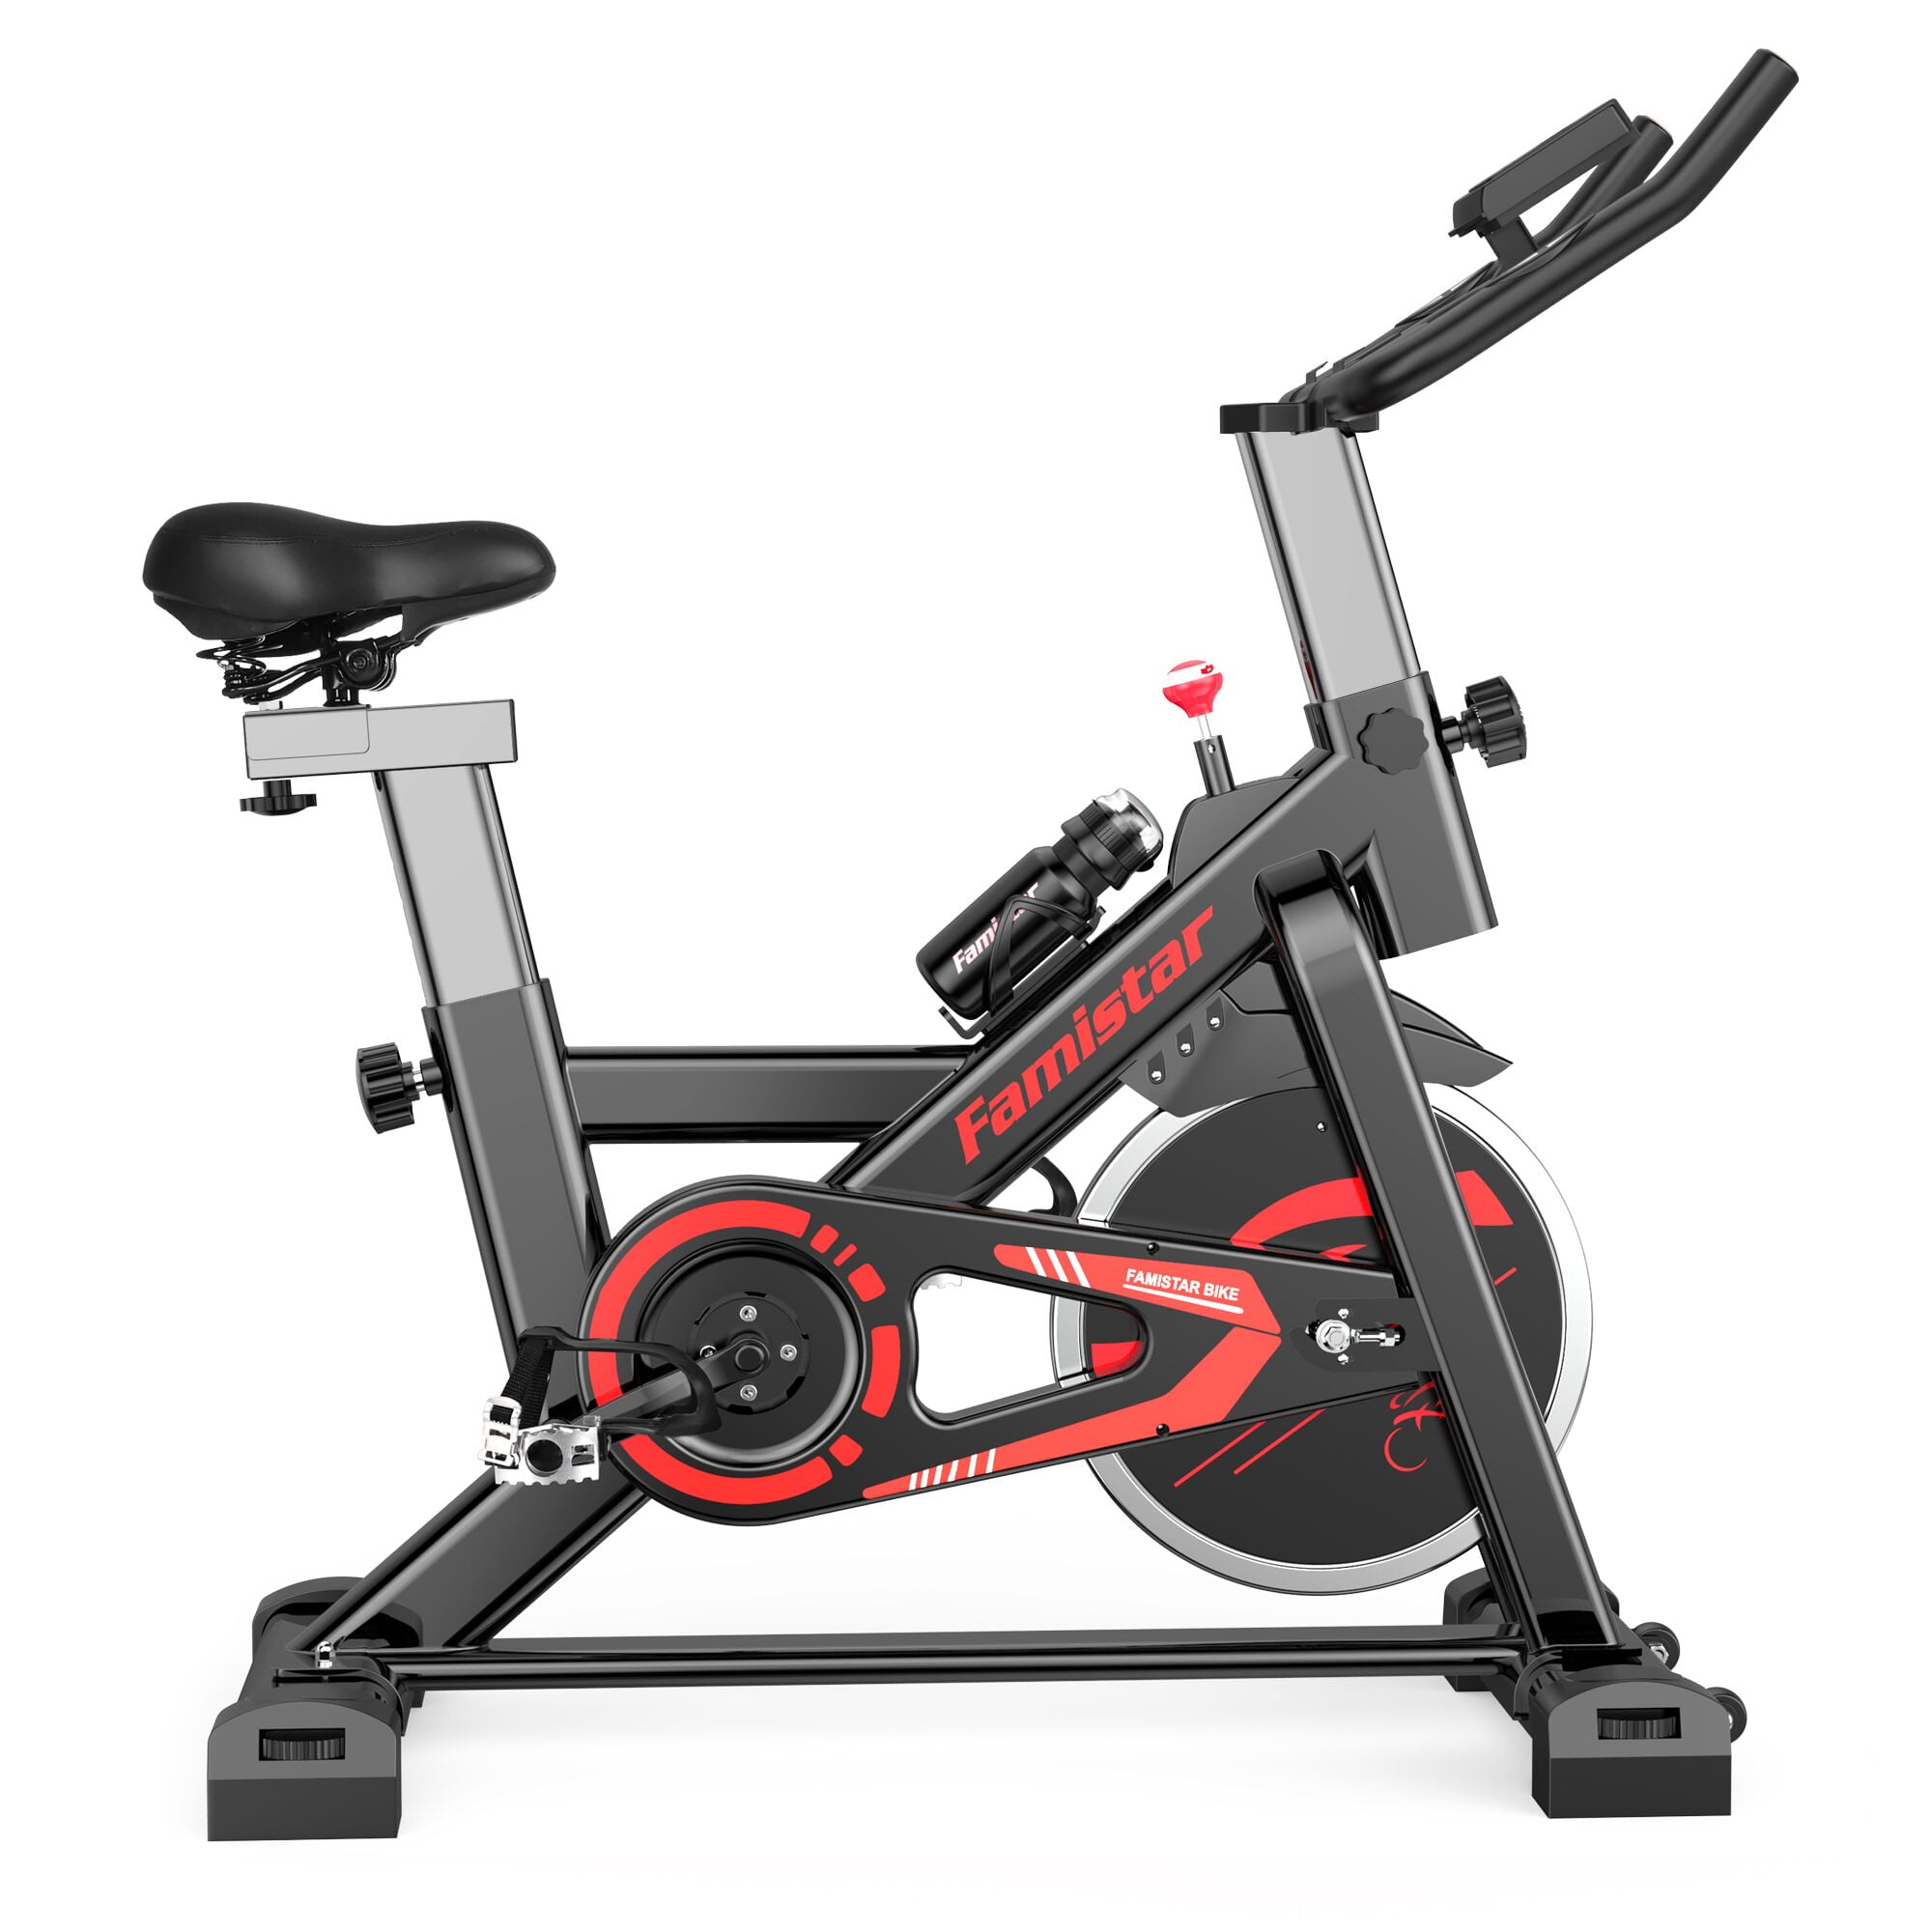 Famistar Exercise Bike Indoor Cycling Stationary Bike with 28.6Lbs ... - B085Db96 424b 4133 826D 7cacf79324D3.71b2cb99D6aa9ae1eee6c9b6D8c85e40